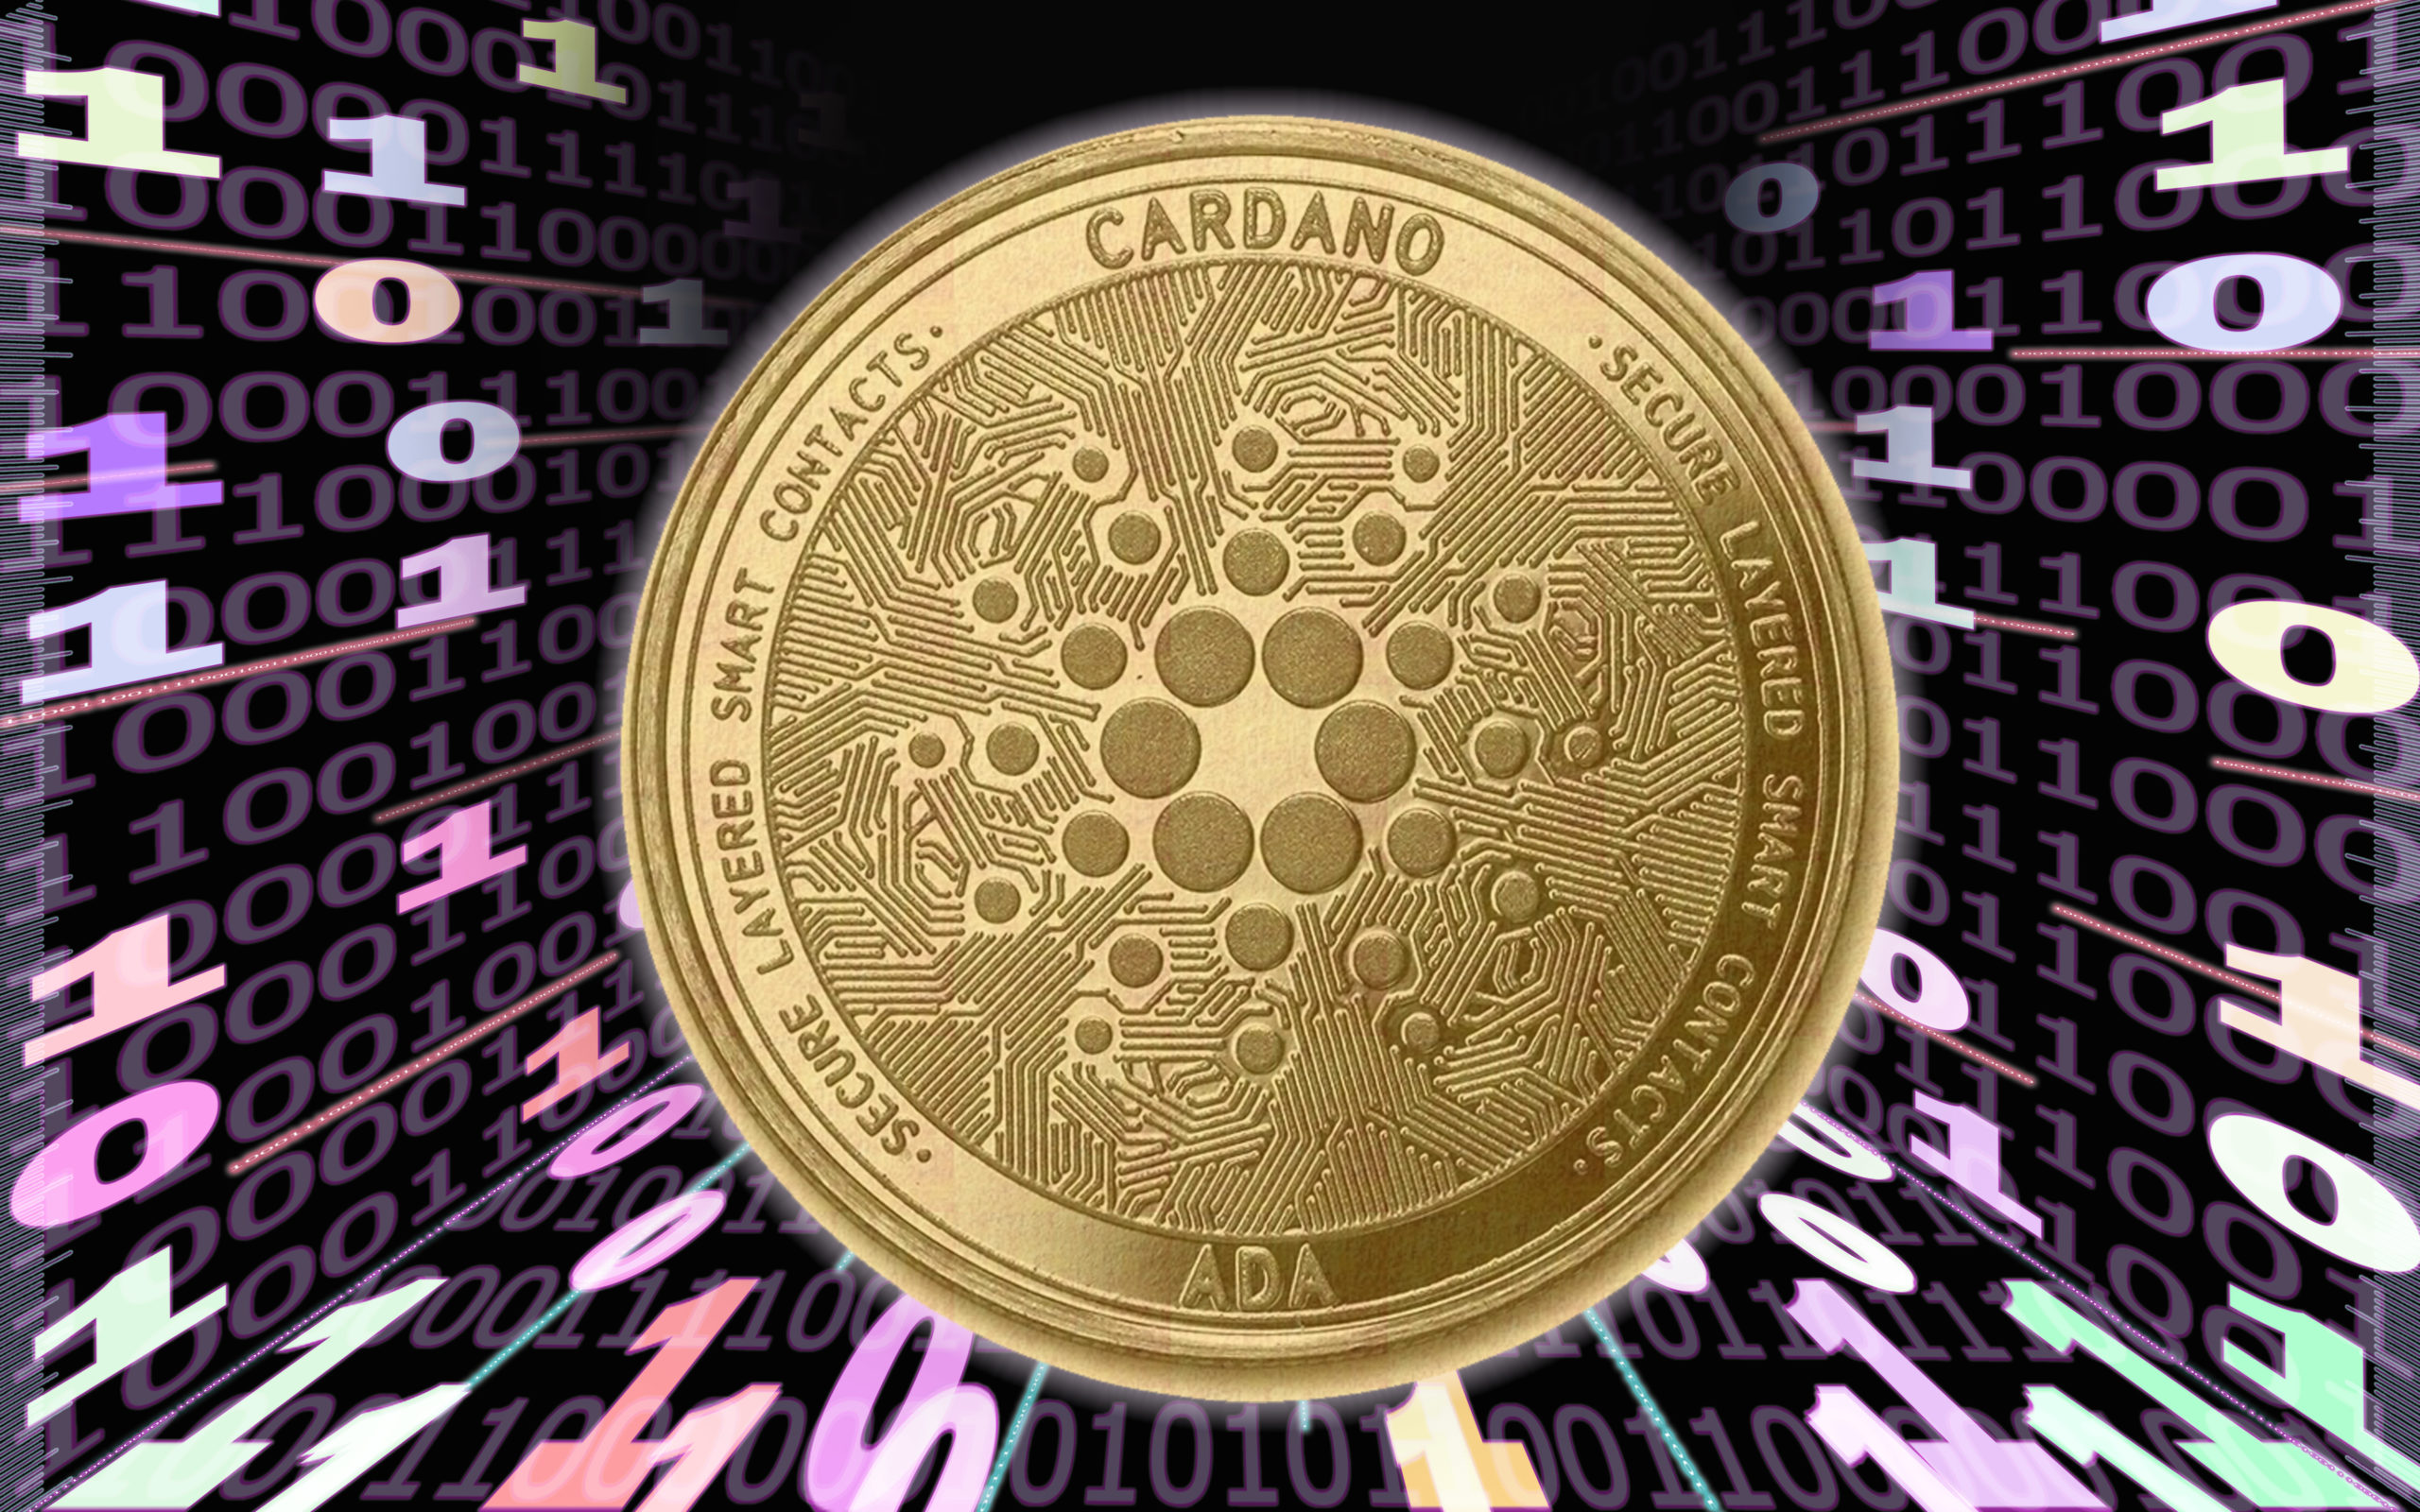 Cardano’s DeFi Can Now Be Possible on Ethereum Through This Integration: Details